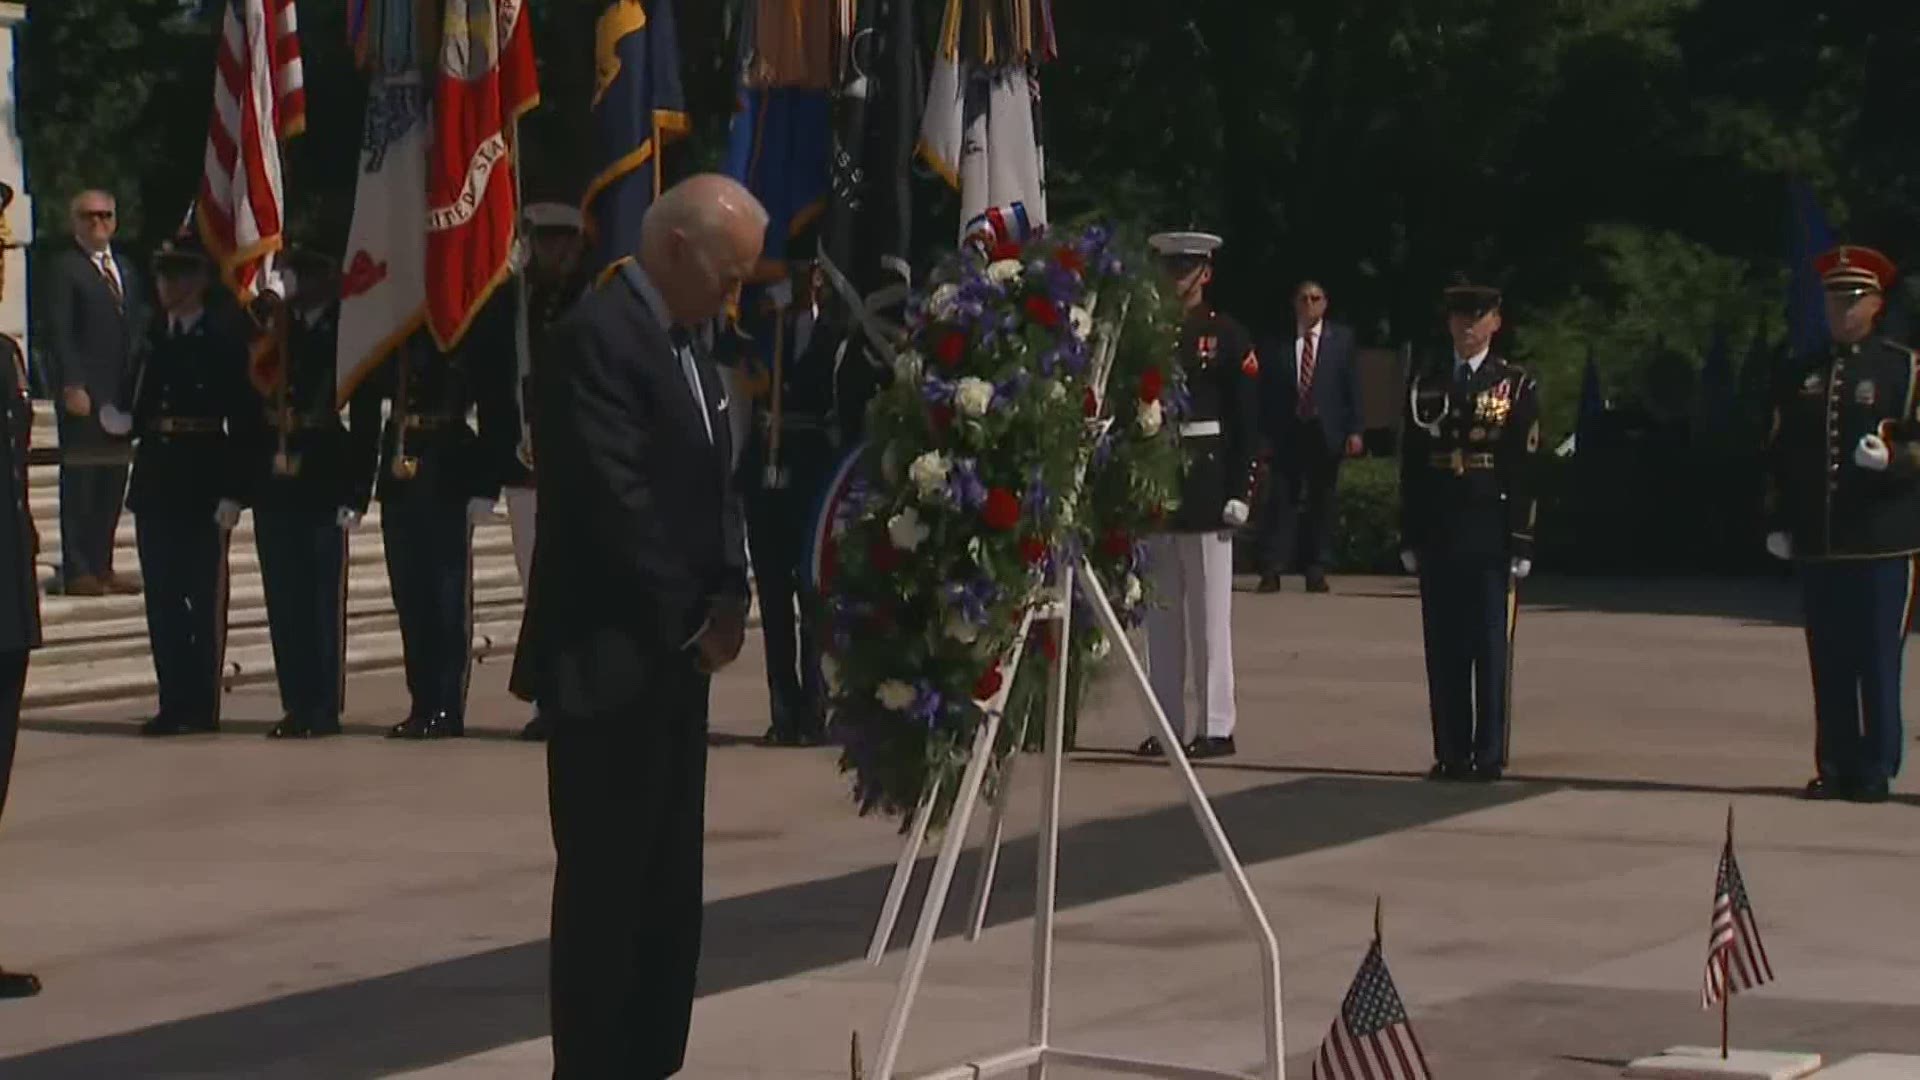 President Biden and Vice President Harris on Memorial Day at a wreath-laying ceremony at the Arlington National Cemetery.